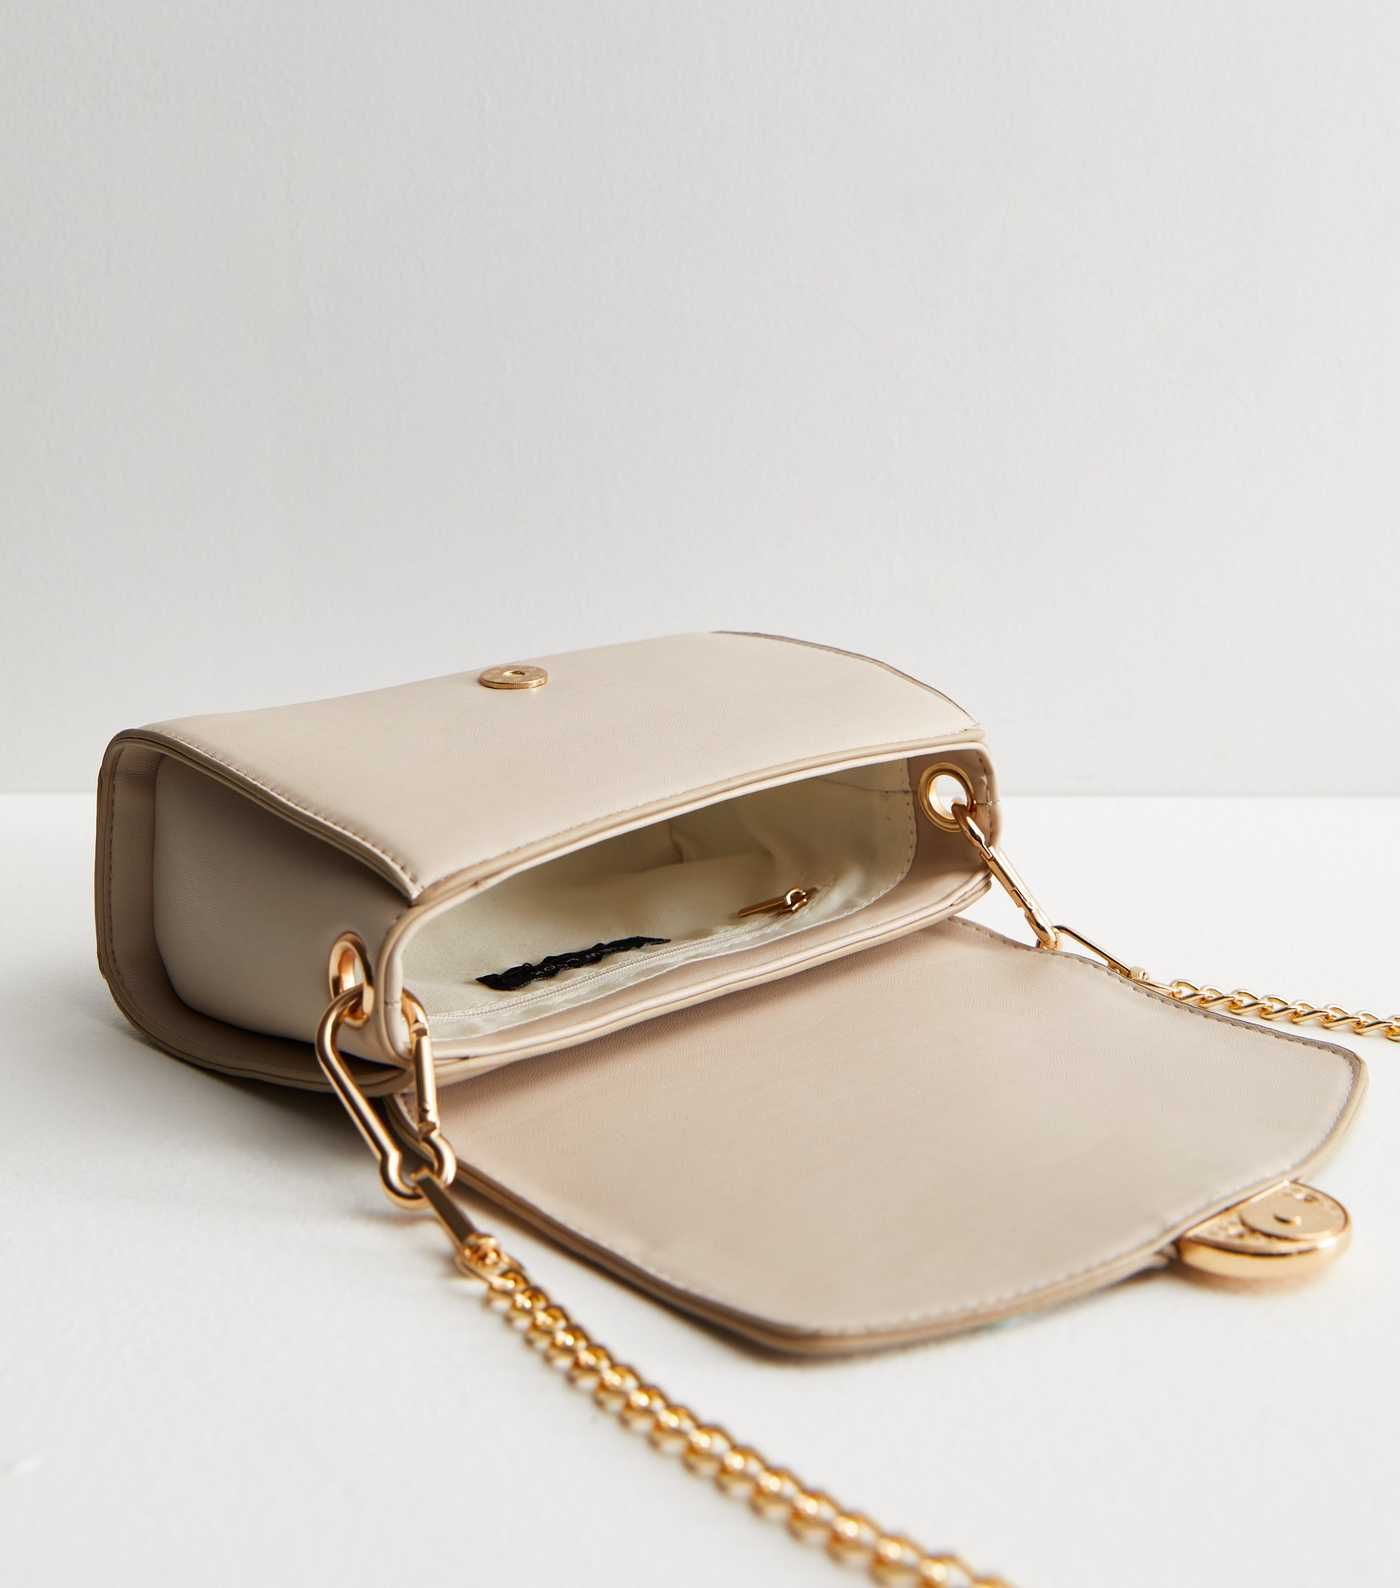 Stone Leather-Look Cross Body Bag
						
						Add to Saved Items
						Remove from Saved Items | New Look (UK)